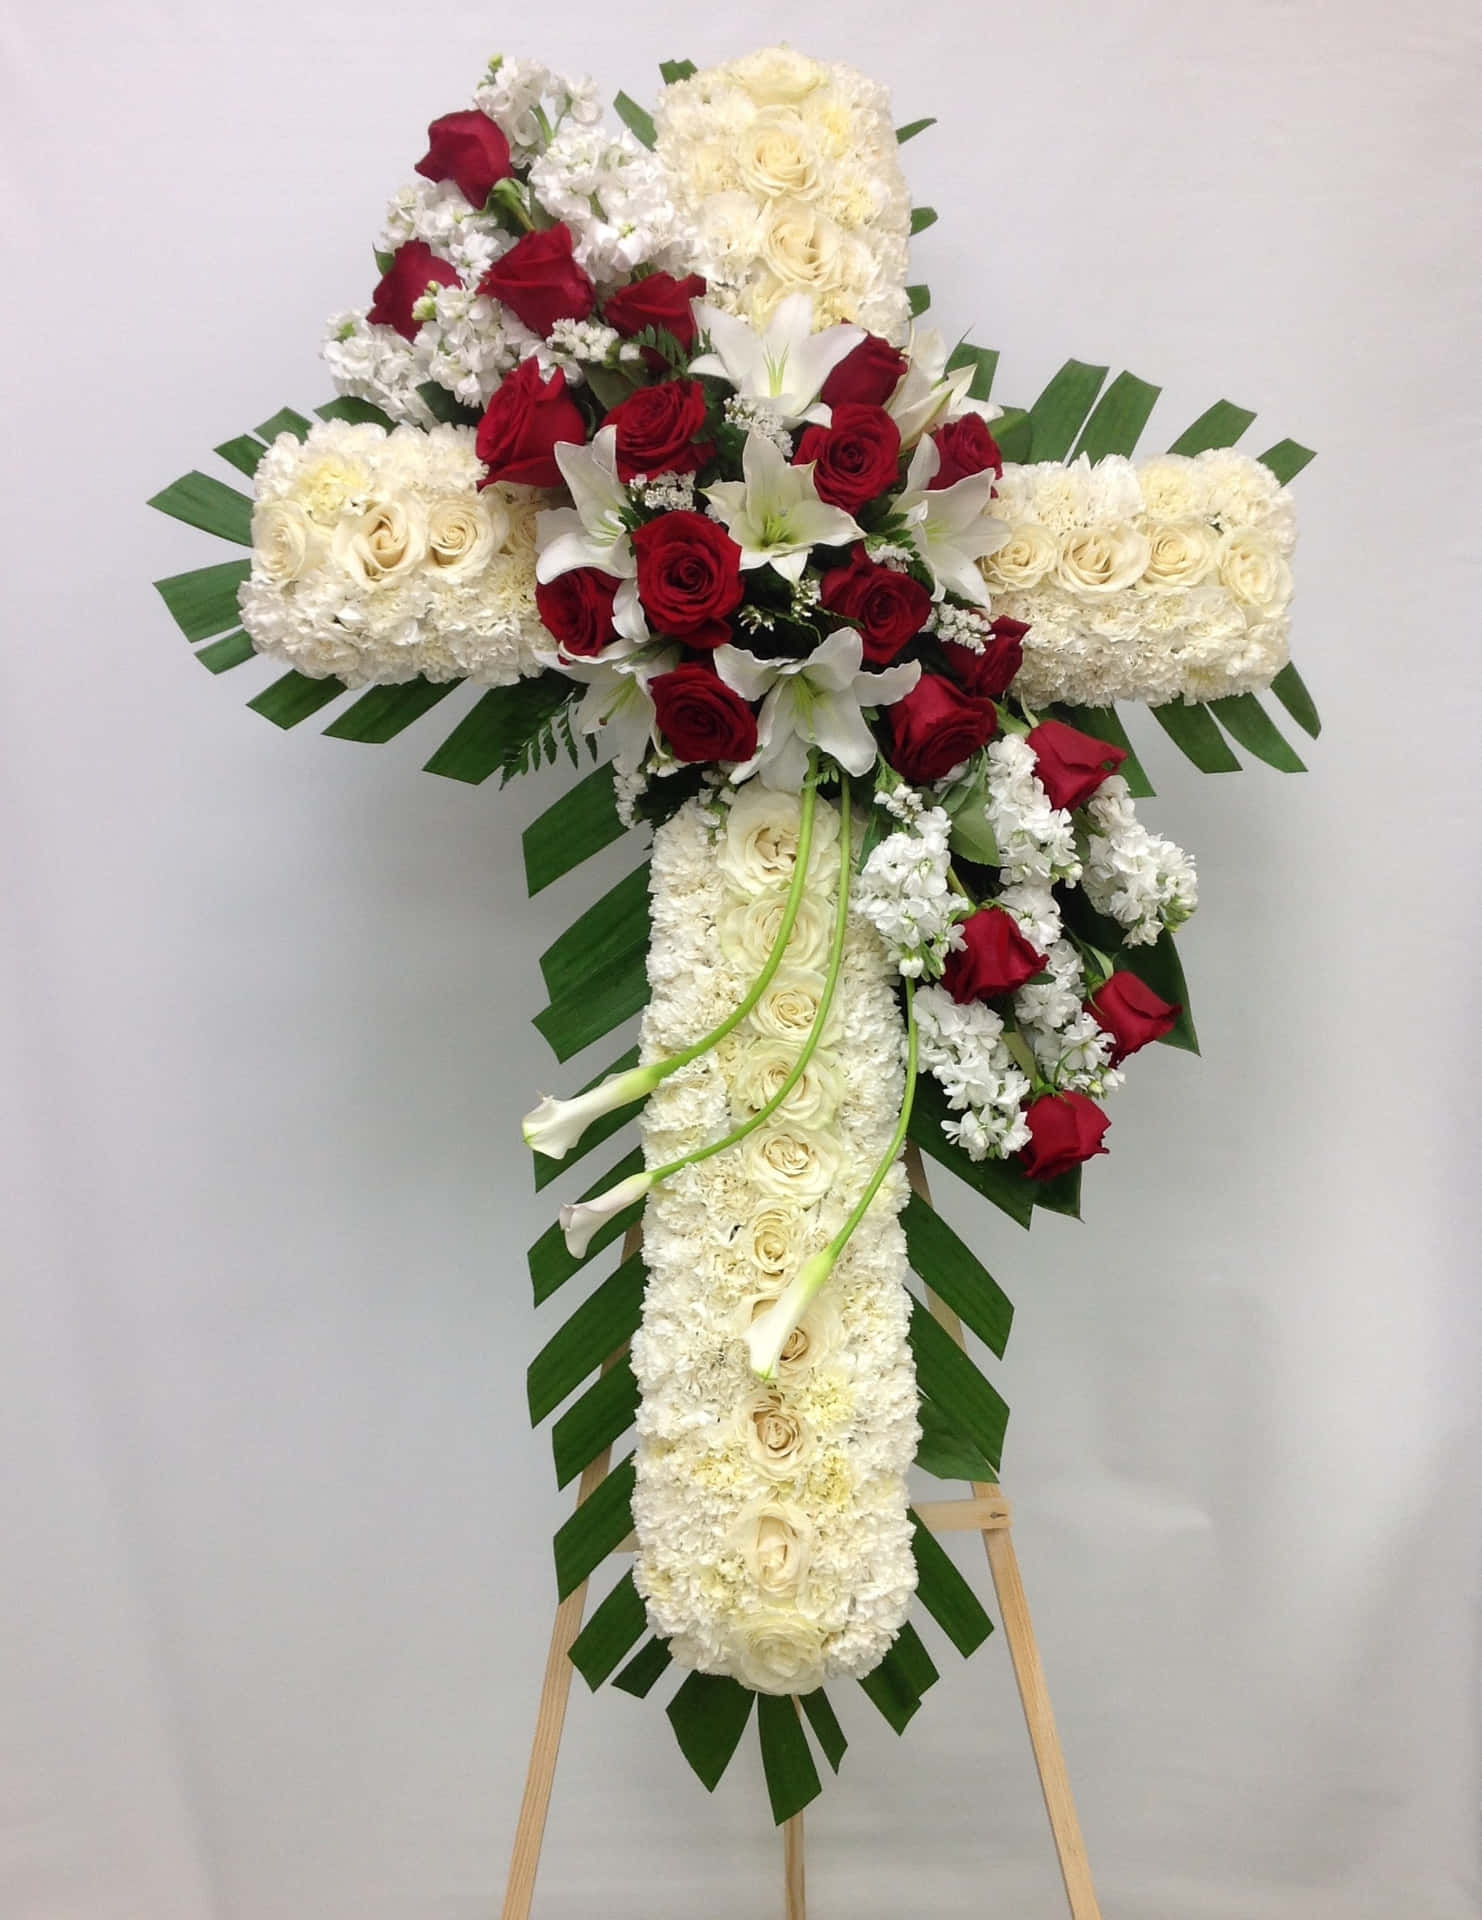 A stunning funeral flower arrangement to honor a beloved one